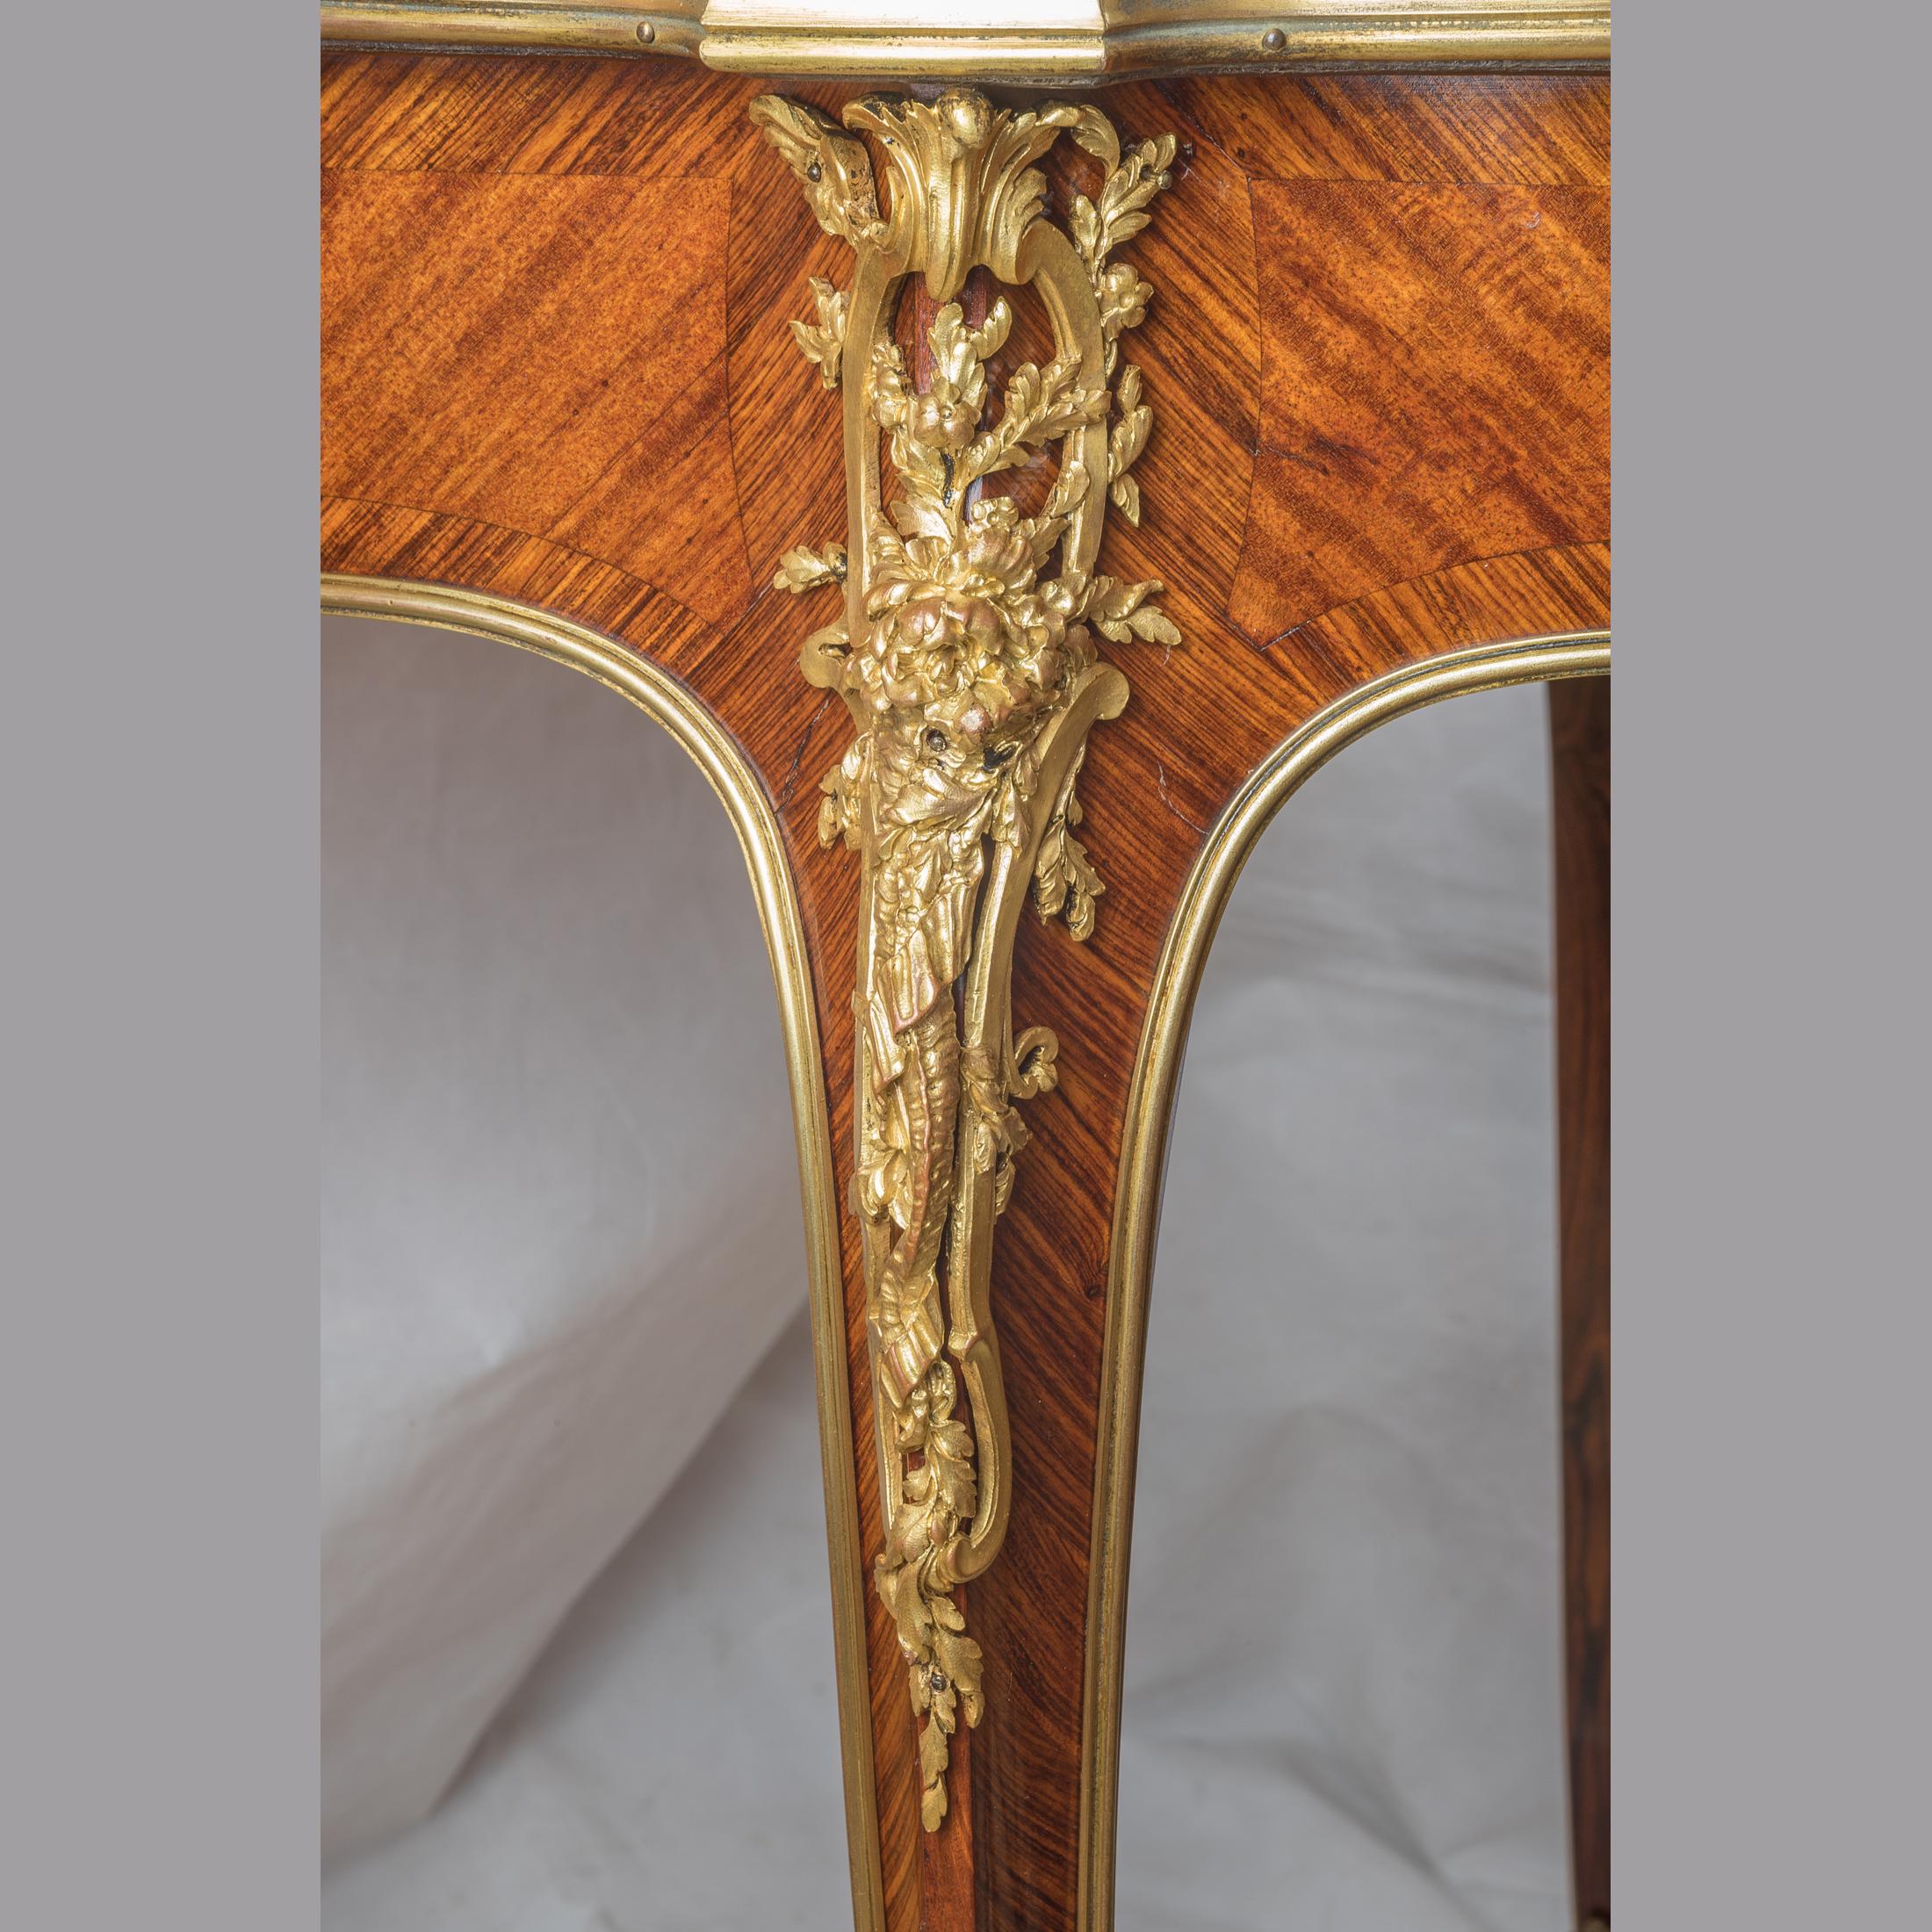 French Louis XV-Style Ormolu-Mounted Marble-Top Center Table by Zwiener For Sale